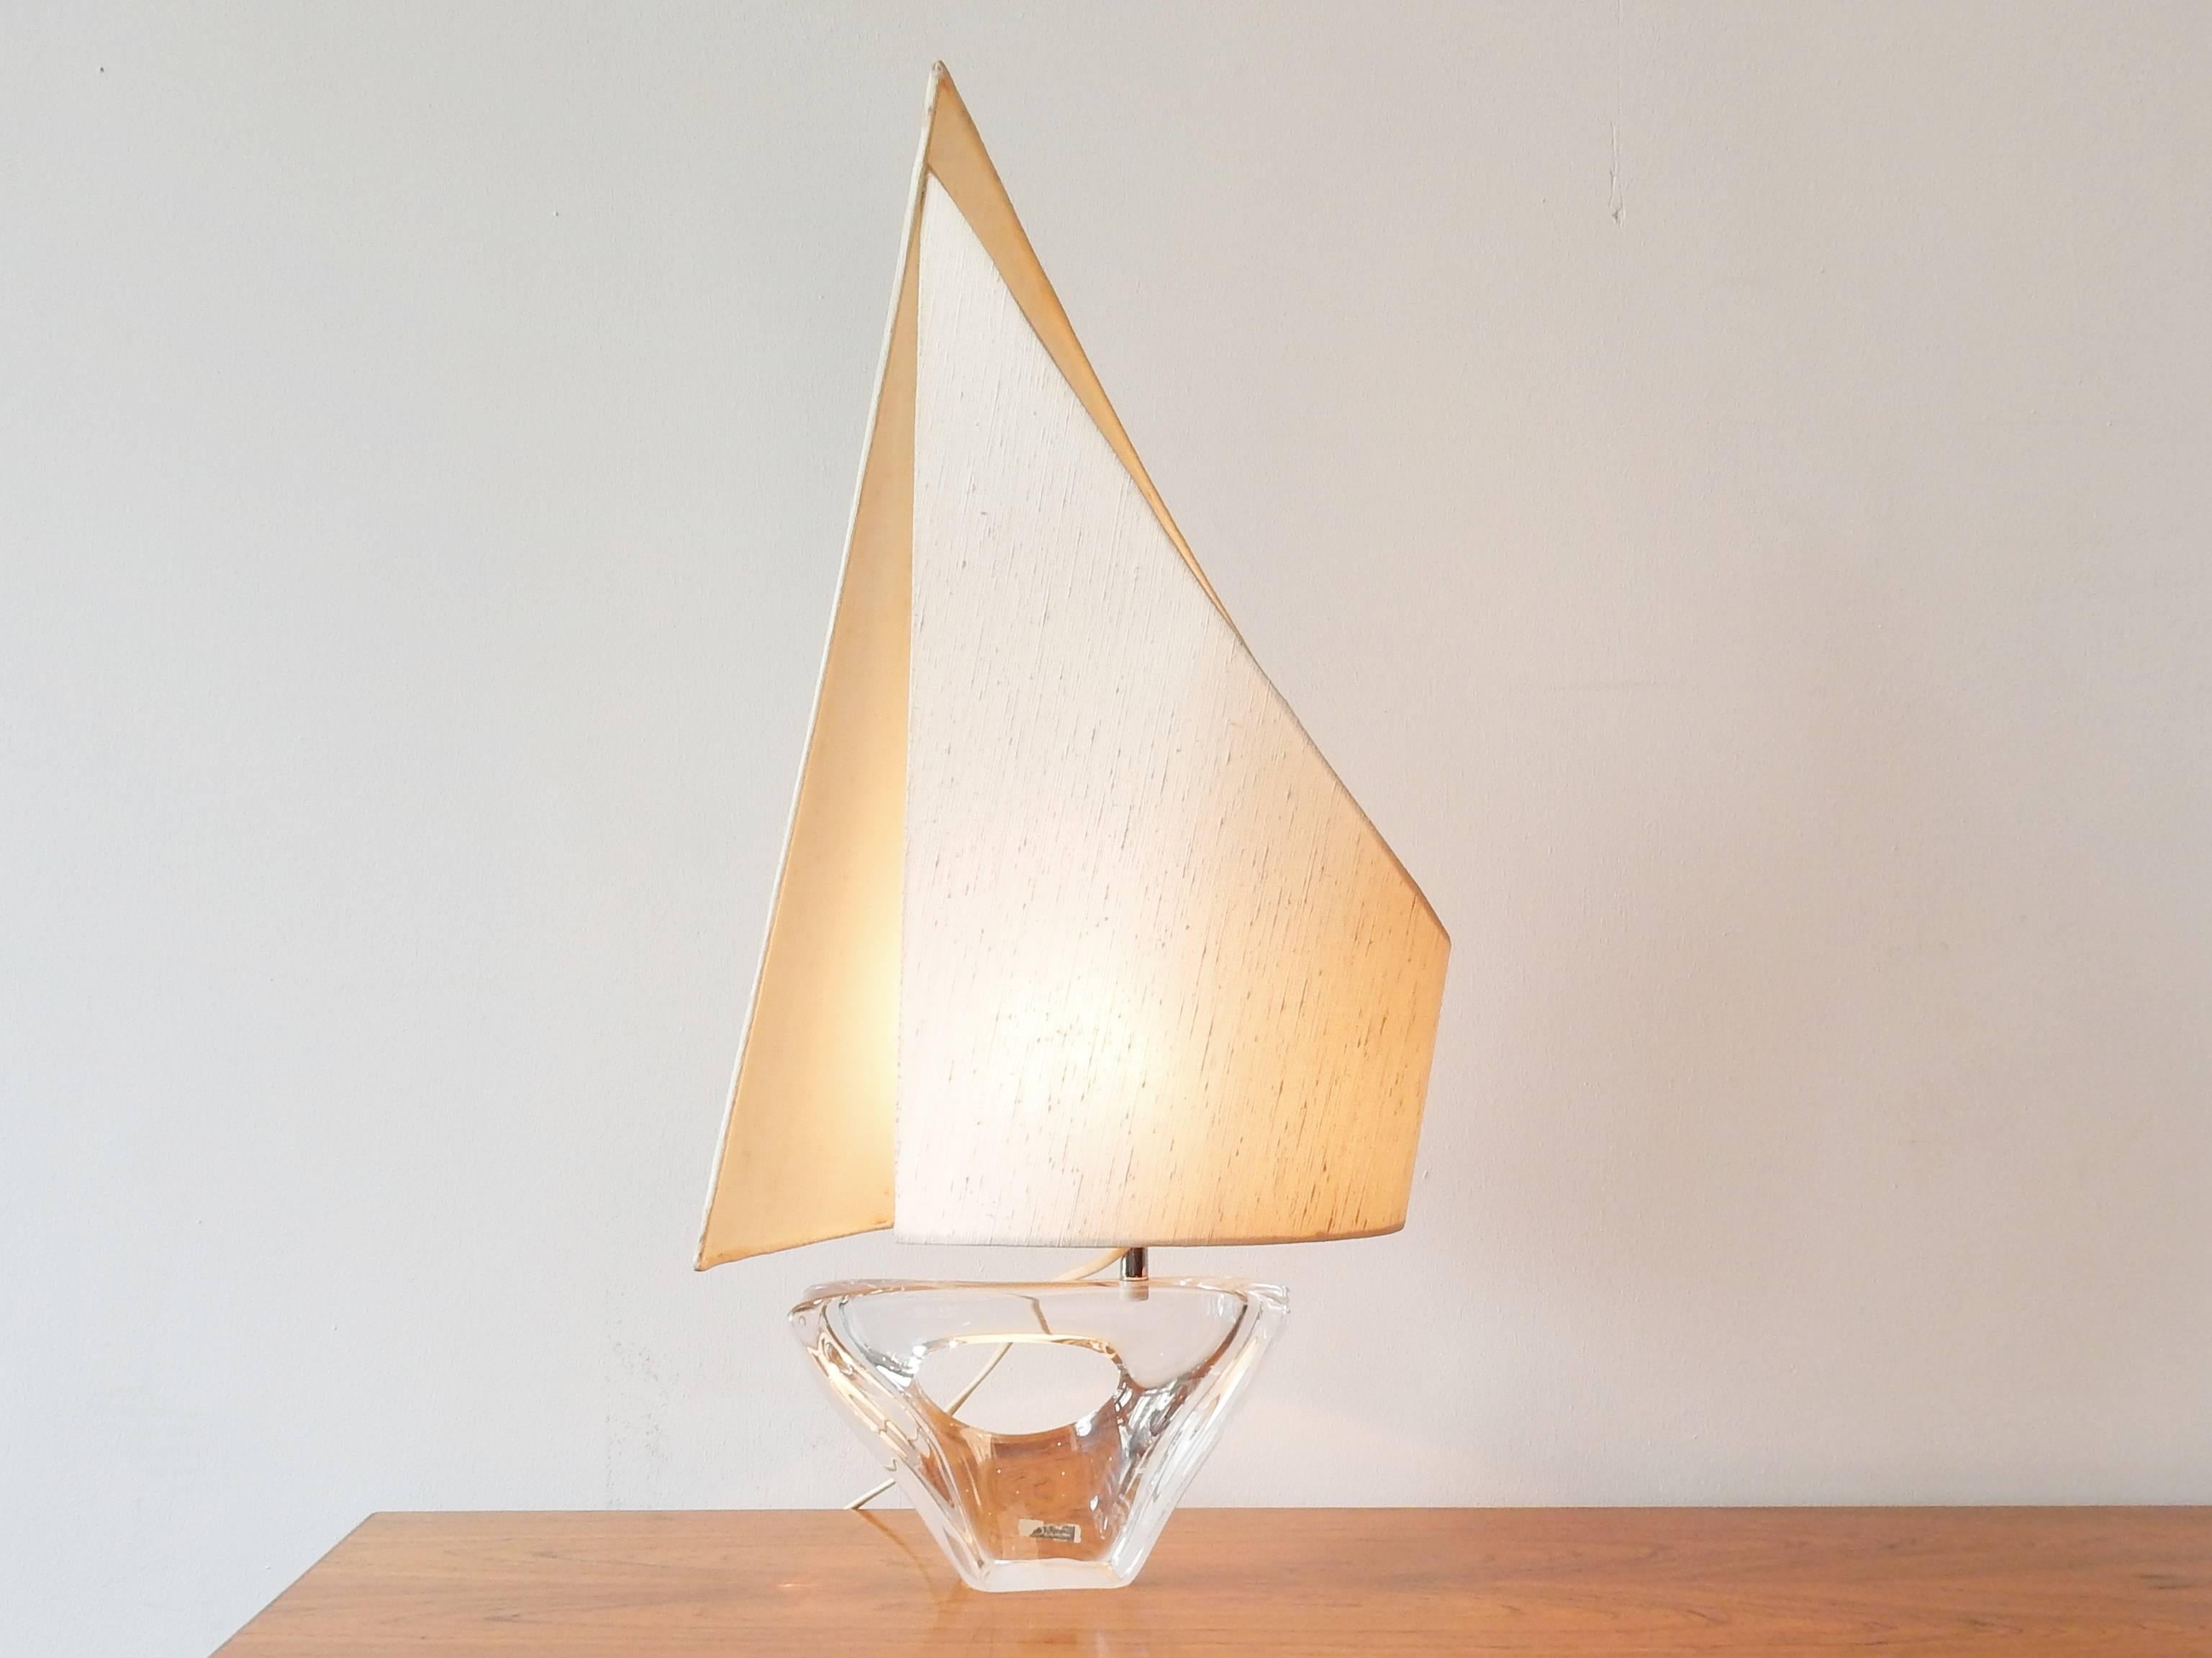 Mid-Century Modern Sailboat Shaped Table Light by Daum, Signed and Labelled, France, 1950s